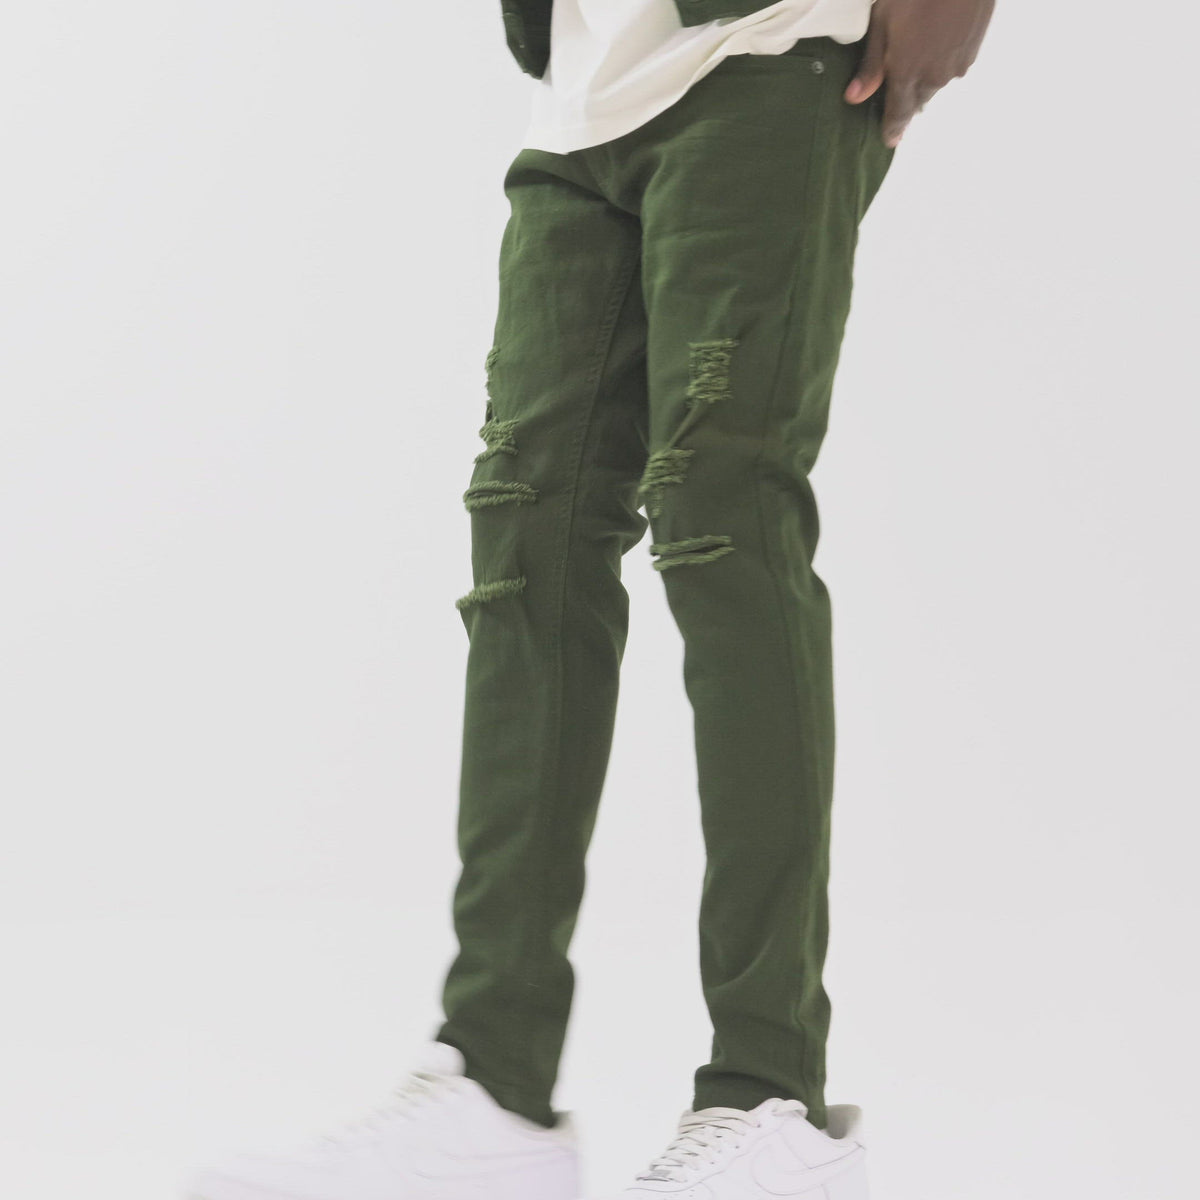 OLIVE PANTS WITH RIPS